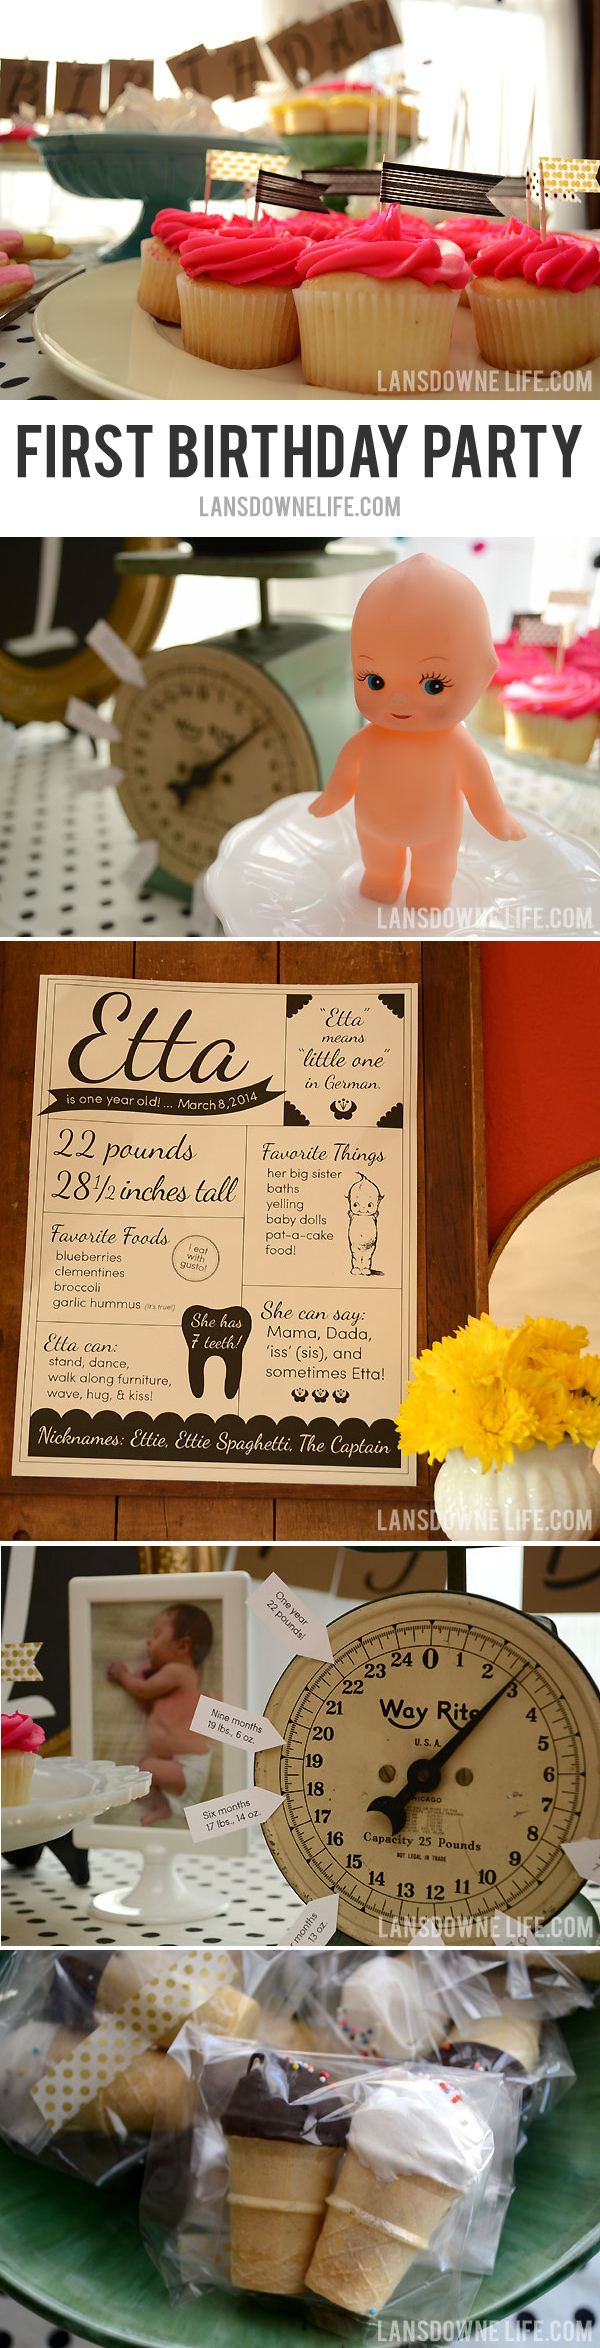 Etta’s colorful and polka-dotted first birthday party